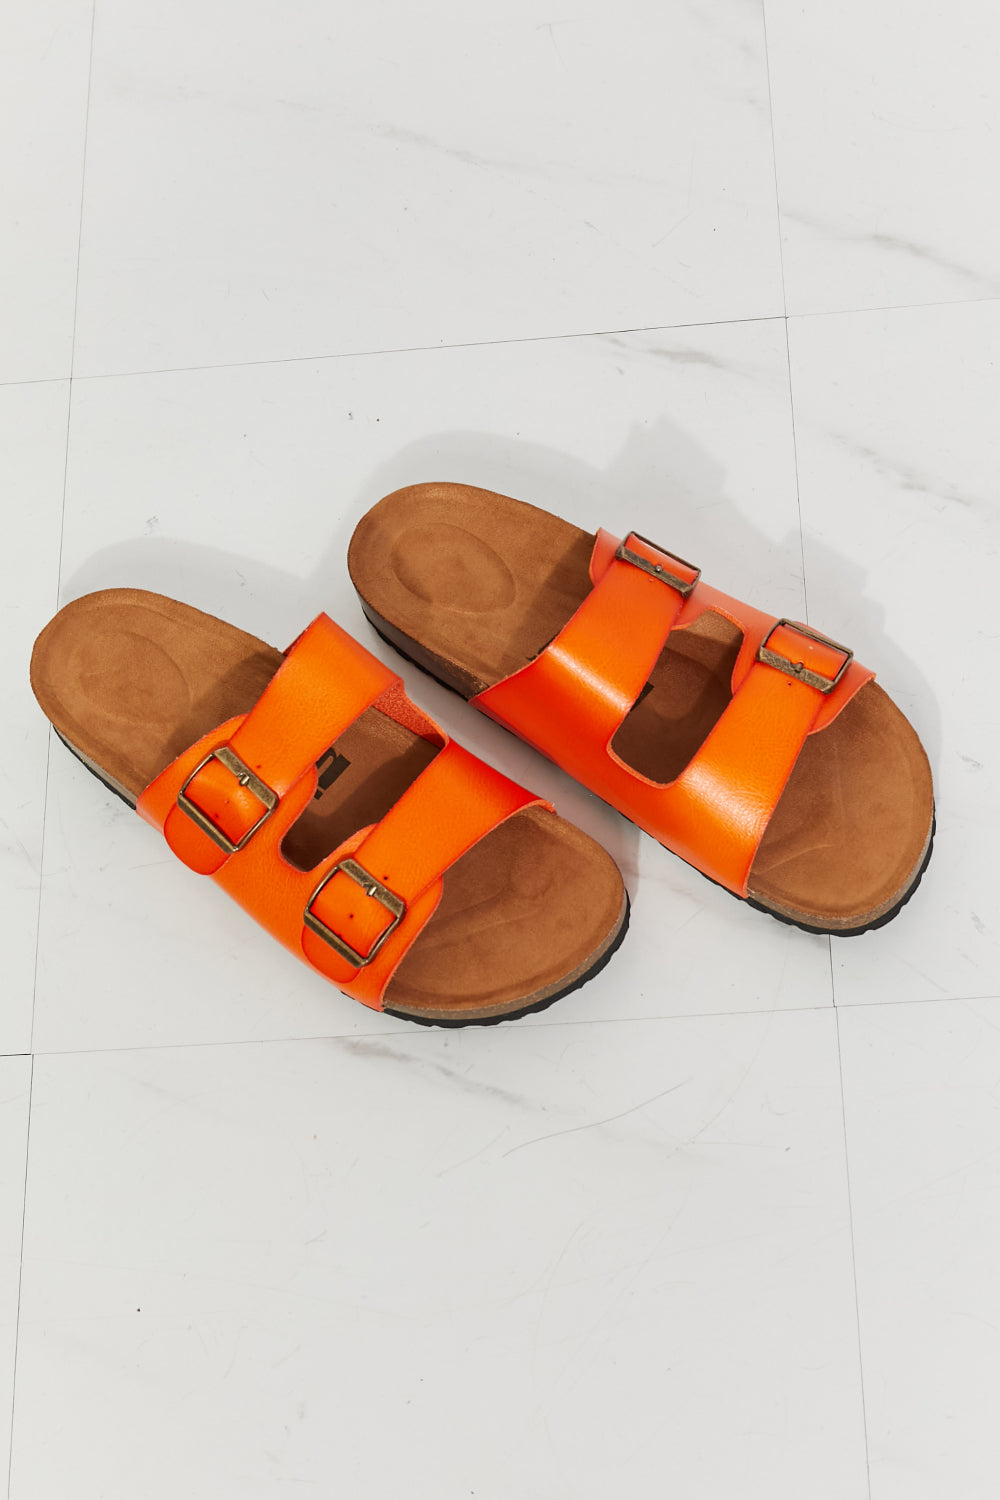 Feeling Alive Sandals-SHIPS DIRECTLY TO YOU!